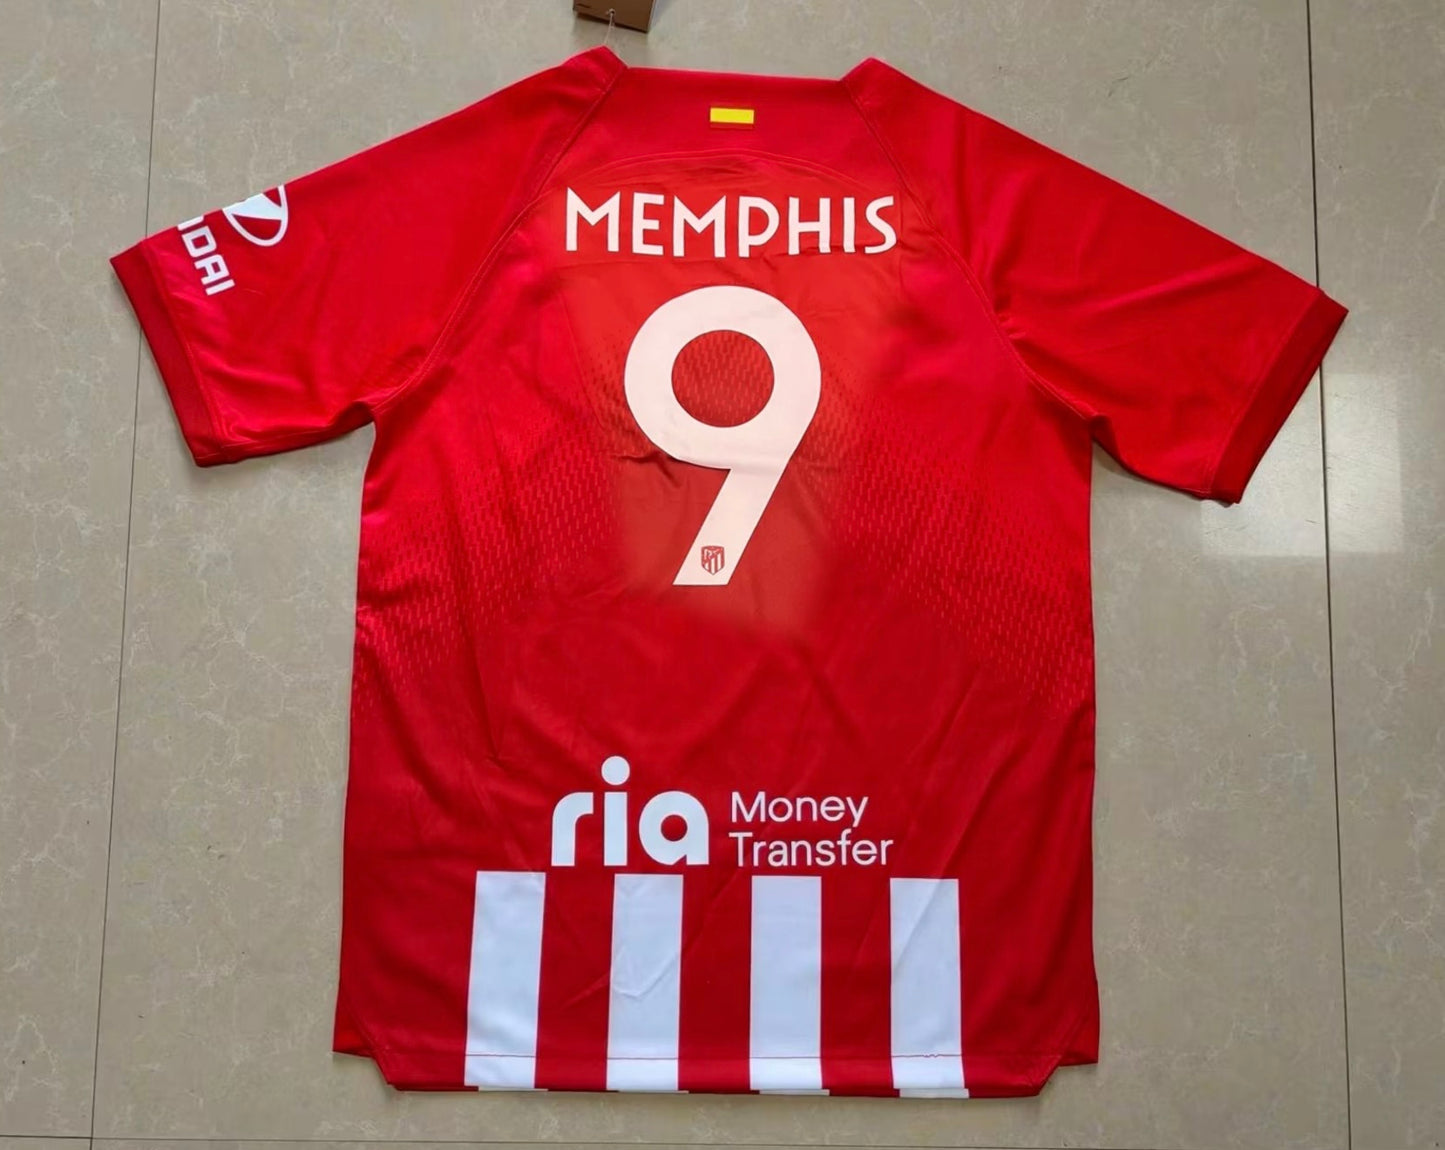 Memphis Depay Atletico Madrid 2023/24 Home Kit Adidas Authentic On-Field Player Version Soccer Jersey - Red